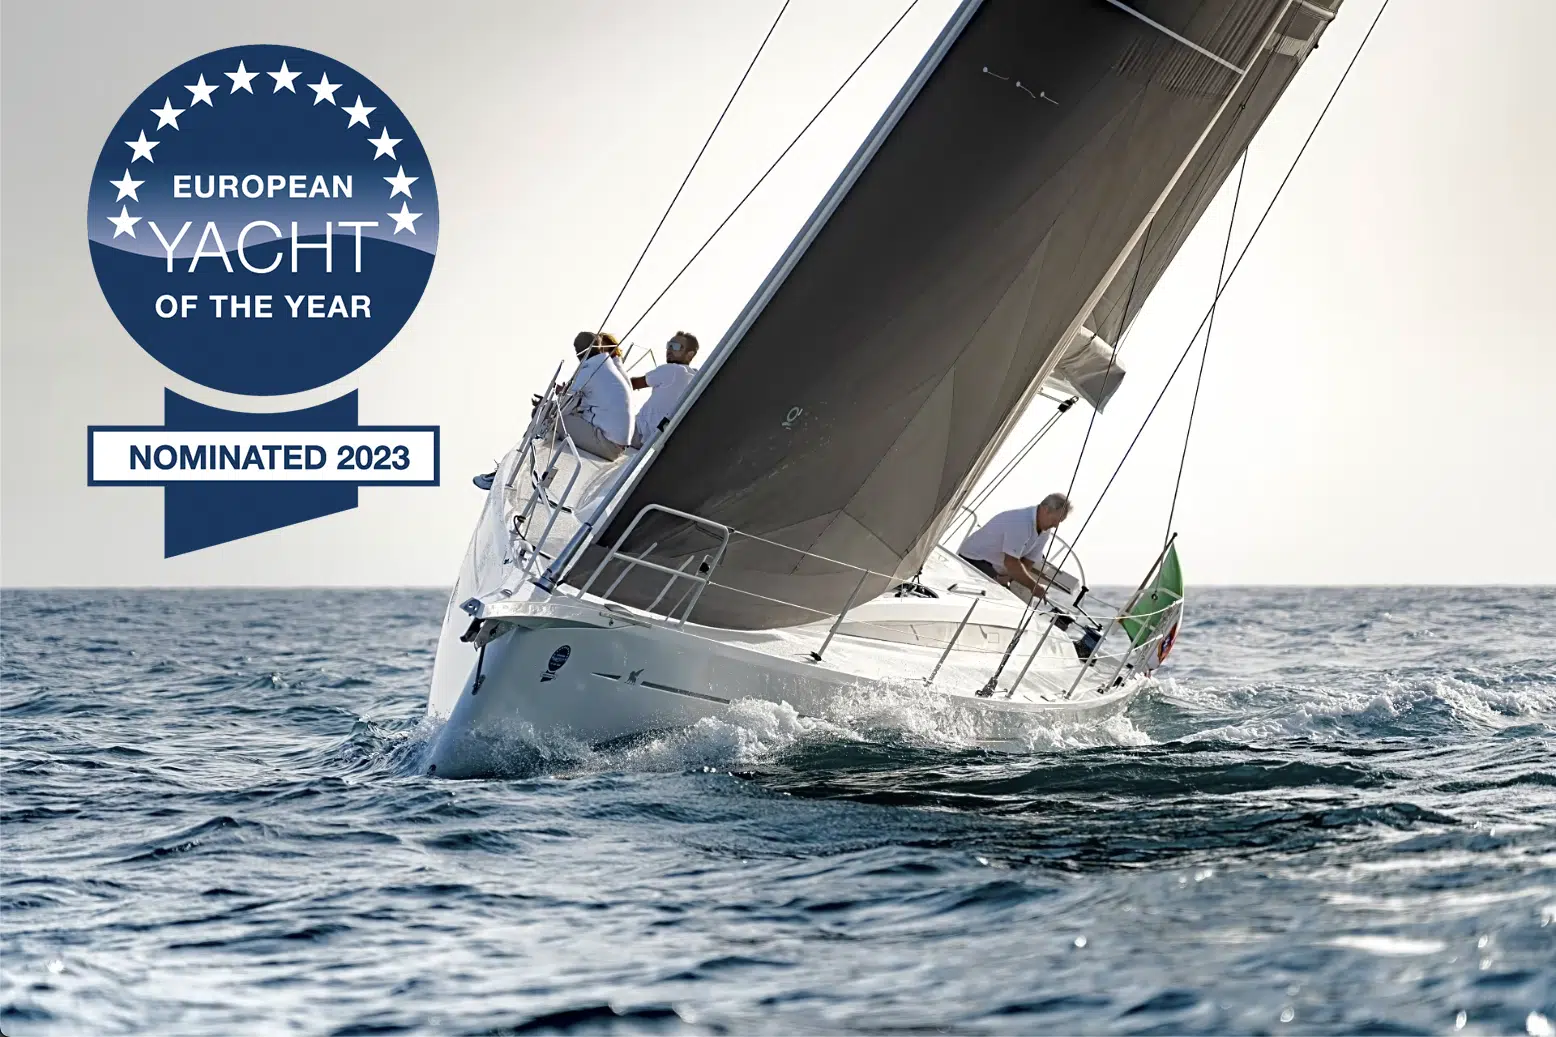 Italia Yachts 12.98 designed by Cossutti Yacht Design nominated for European Yacht of the Year 2023